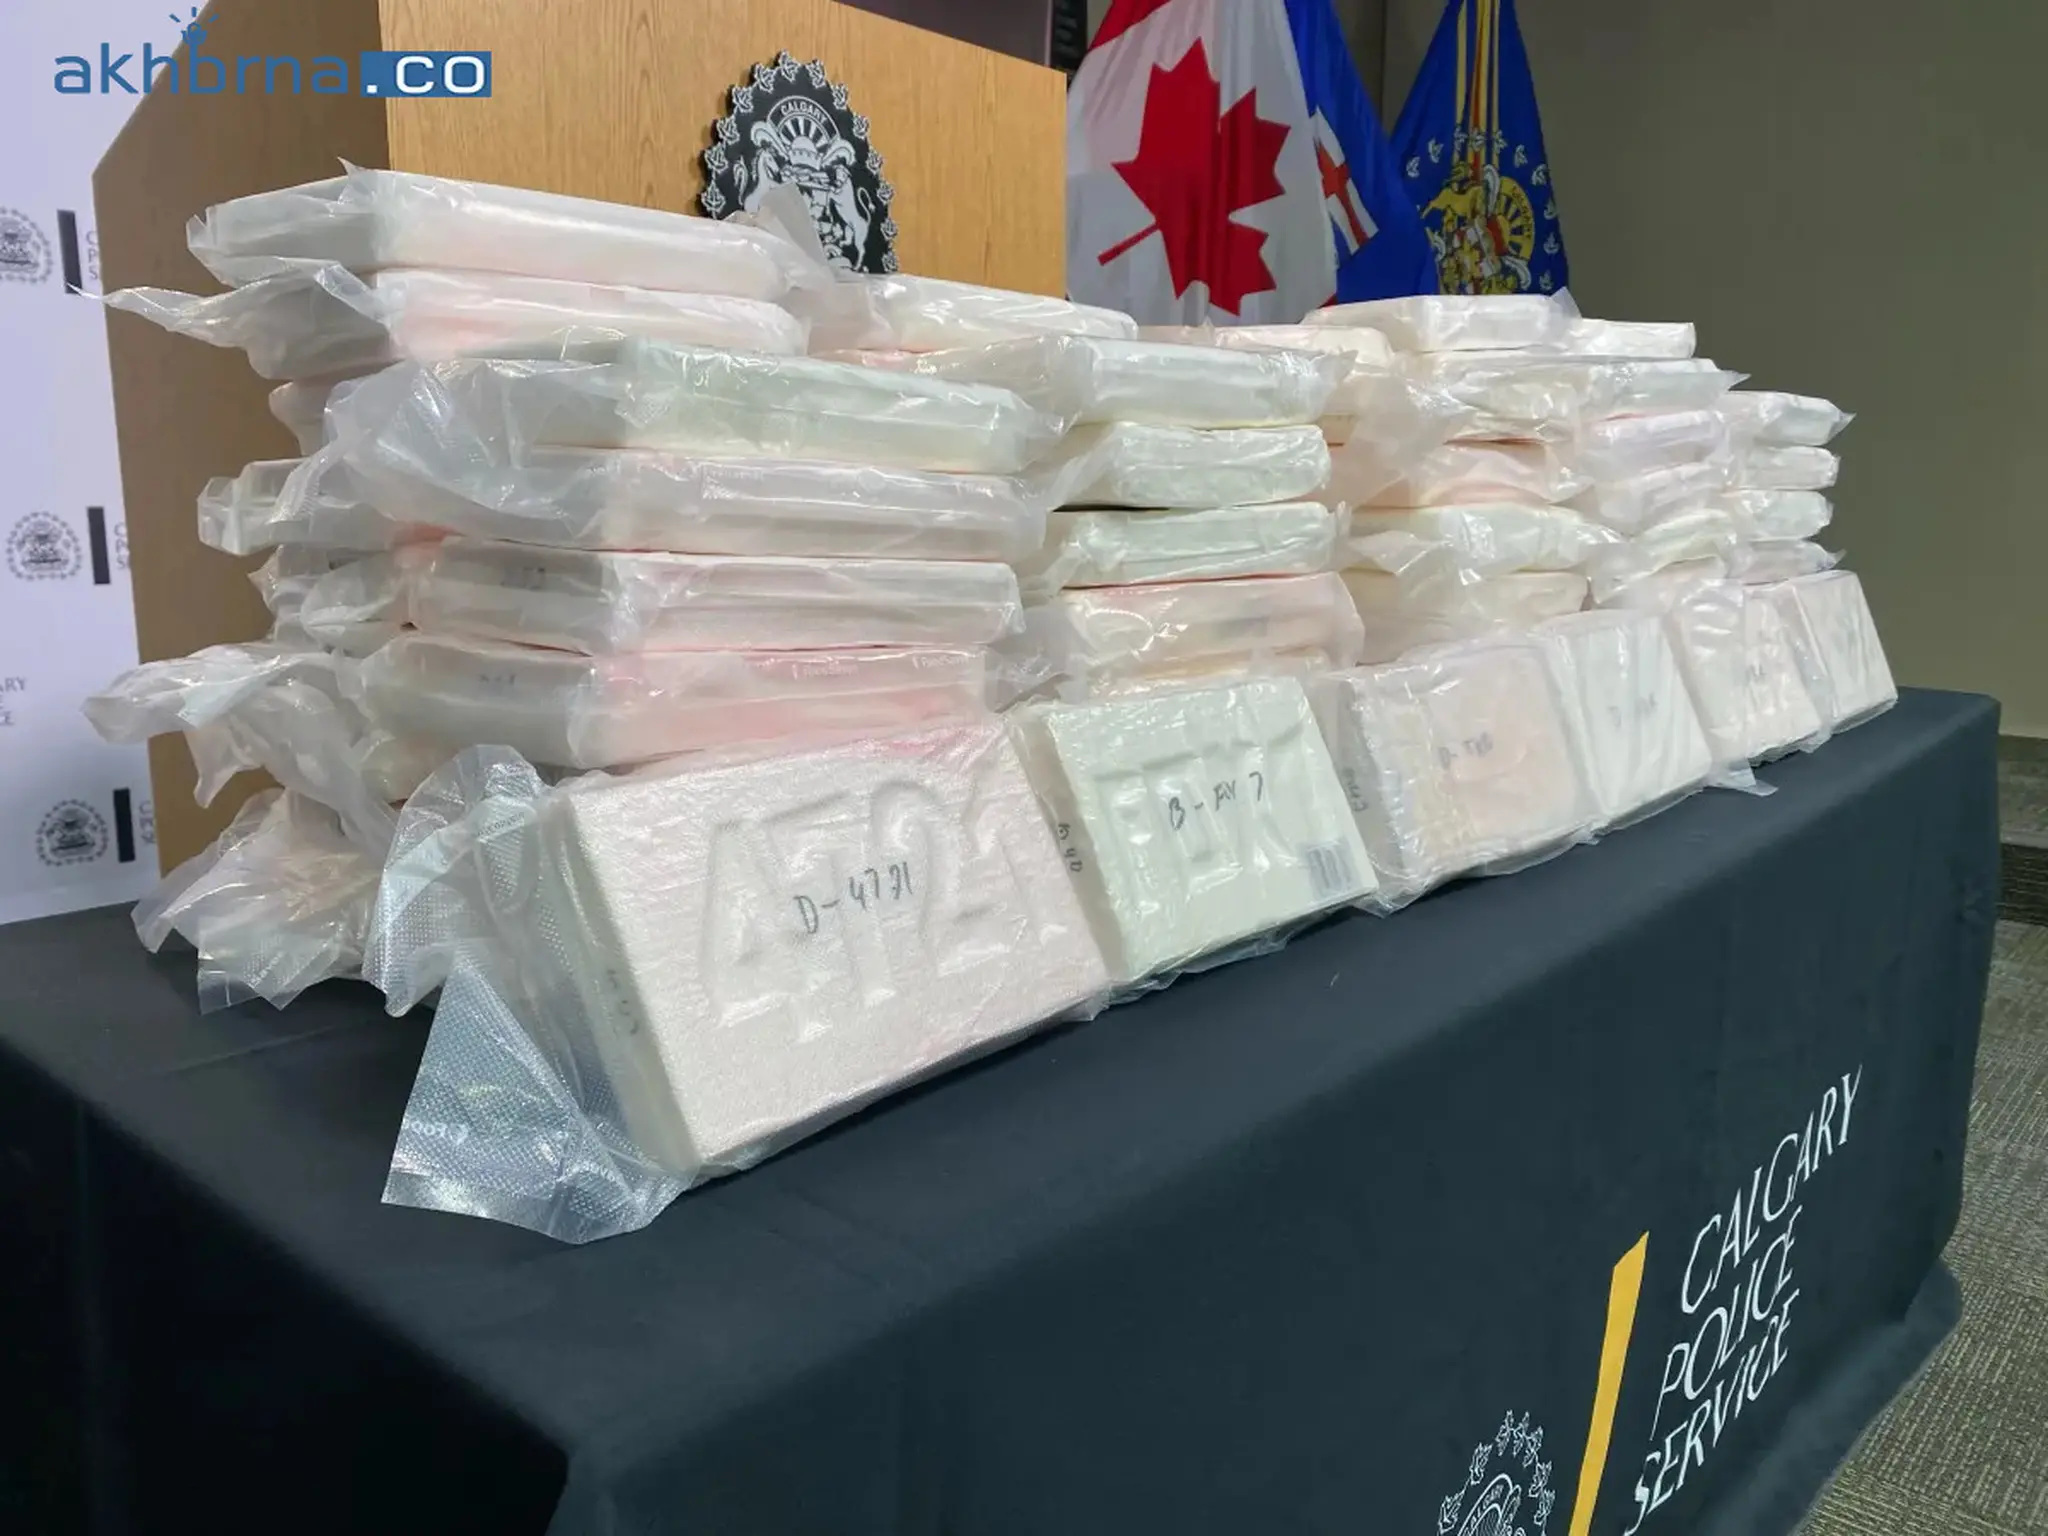 Canada: Two Calgary men arrested with $100K cocaine seized in drug trafficking probe